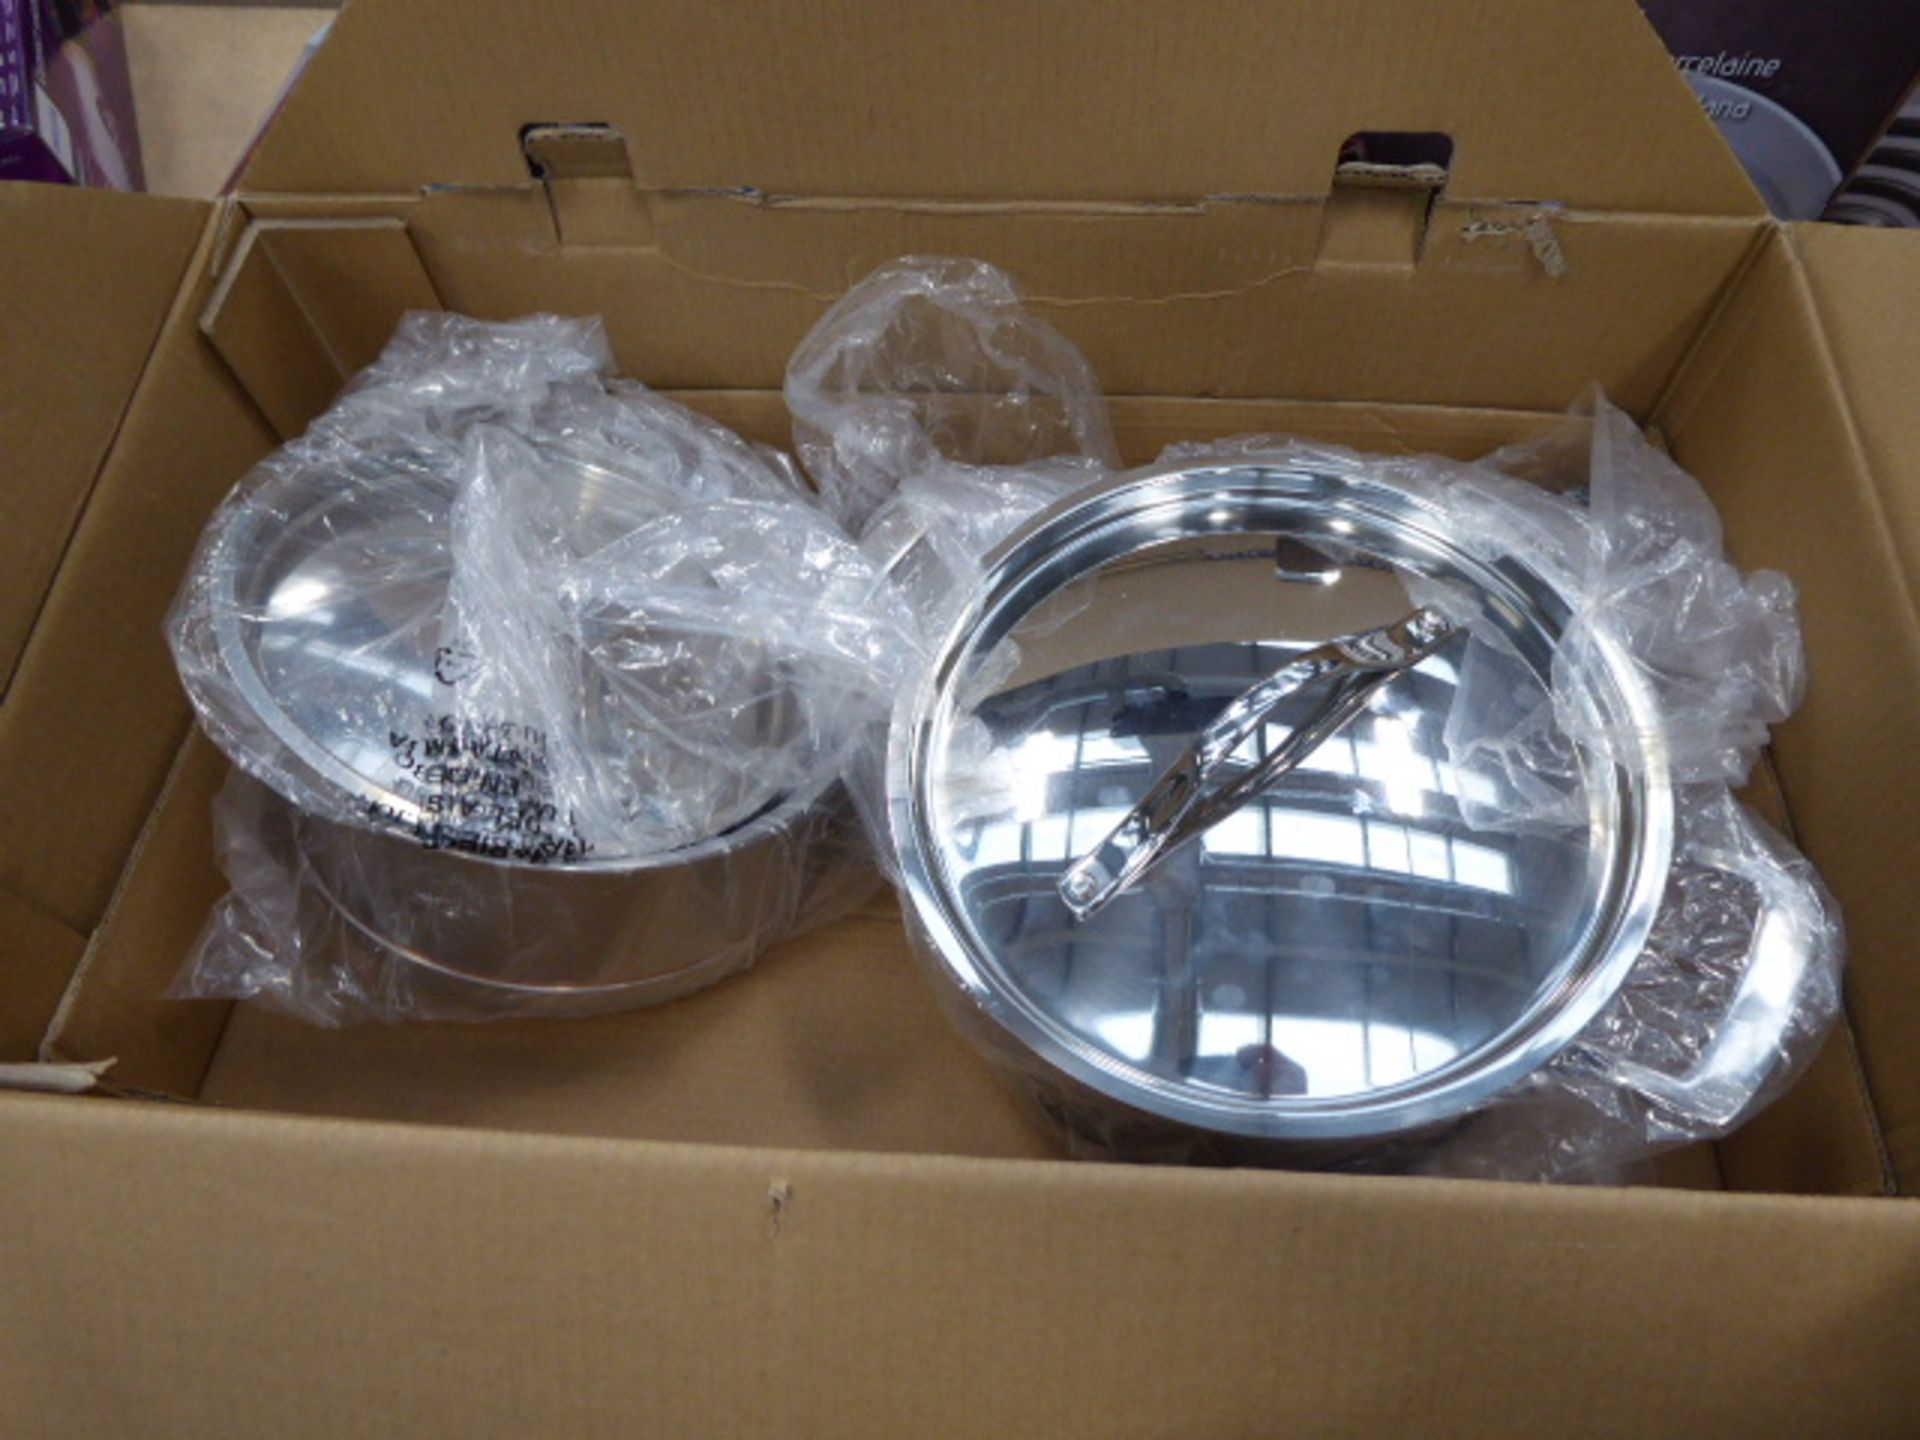 Boxed Kirkland stainless steel cookware set (used pots) - Image 2 of 3